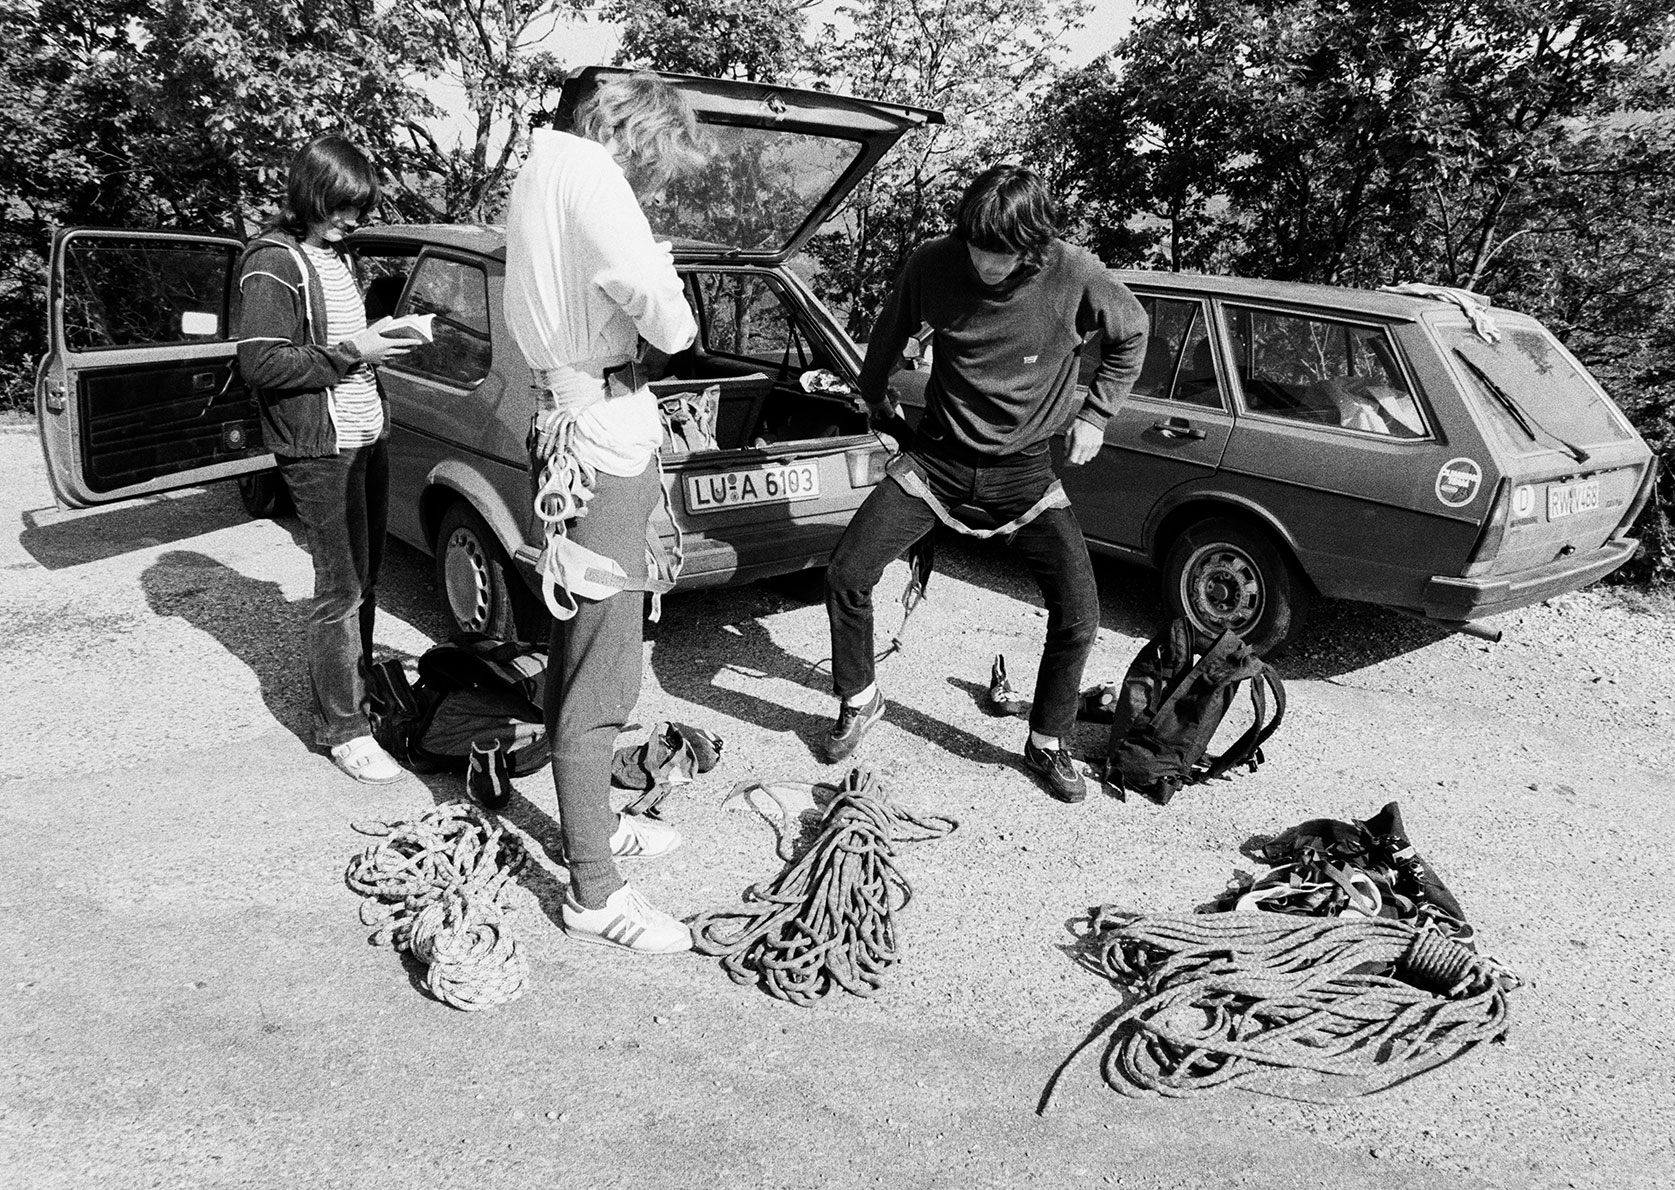 Three climbers putting on their harnesses by parked cars